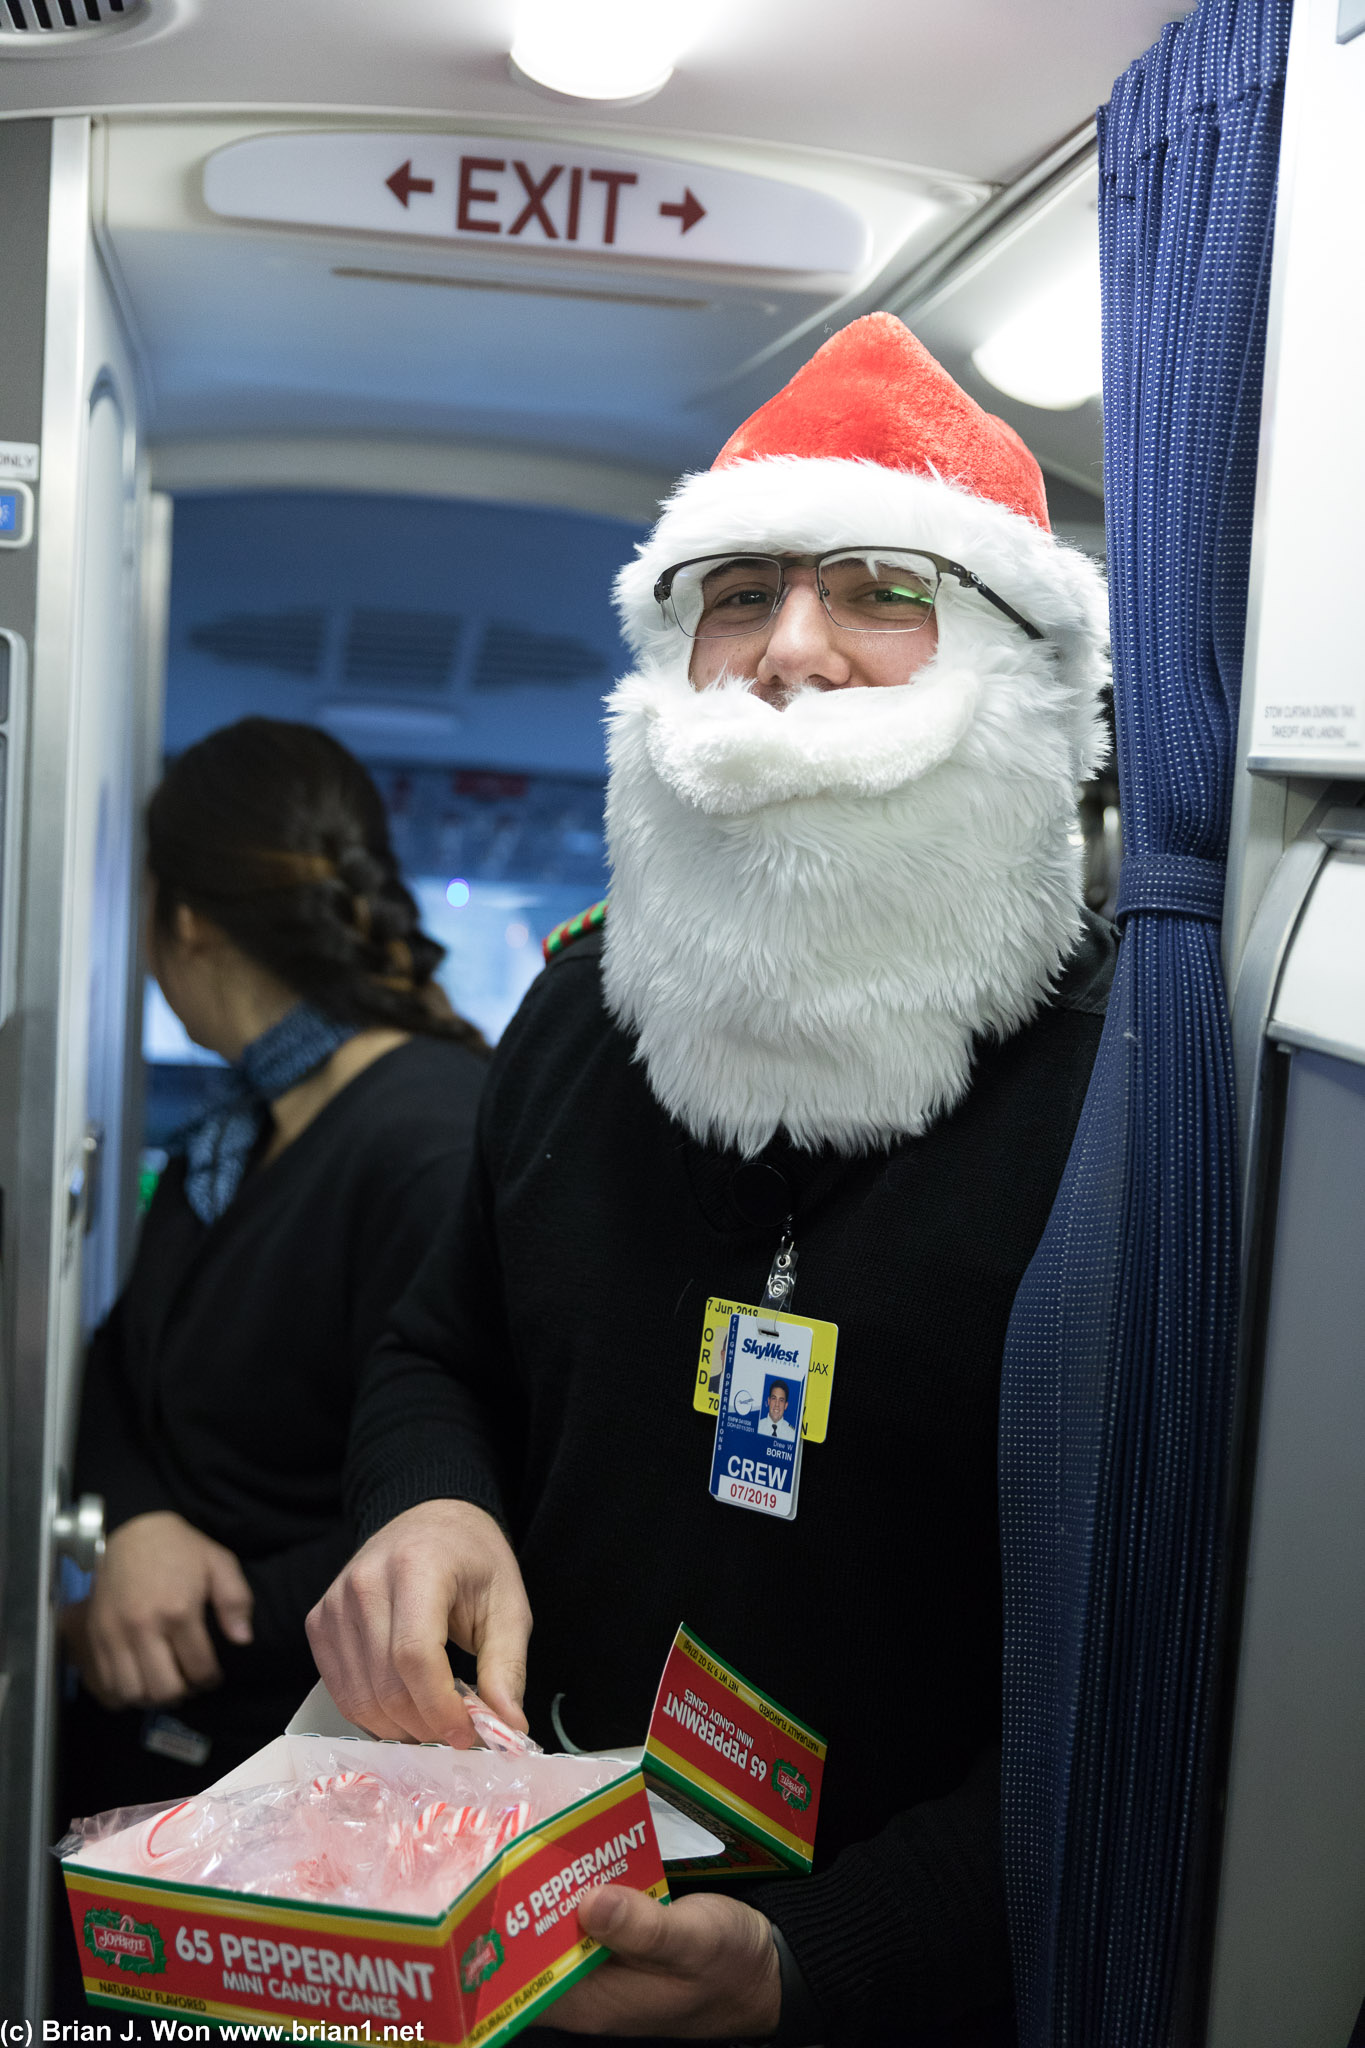 Flight attendants playing elves and handing out candy canes.